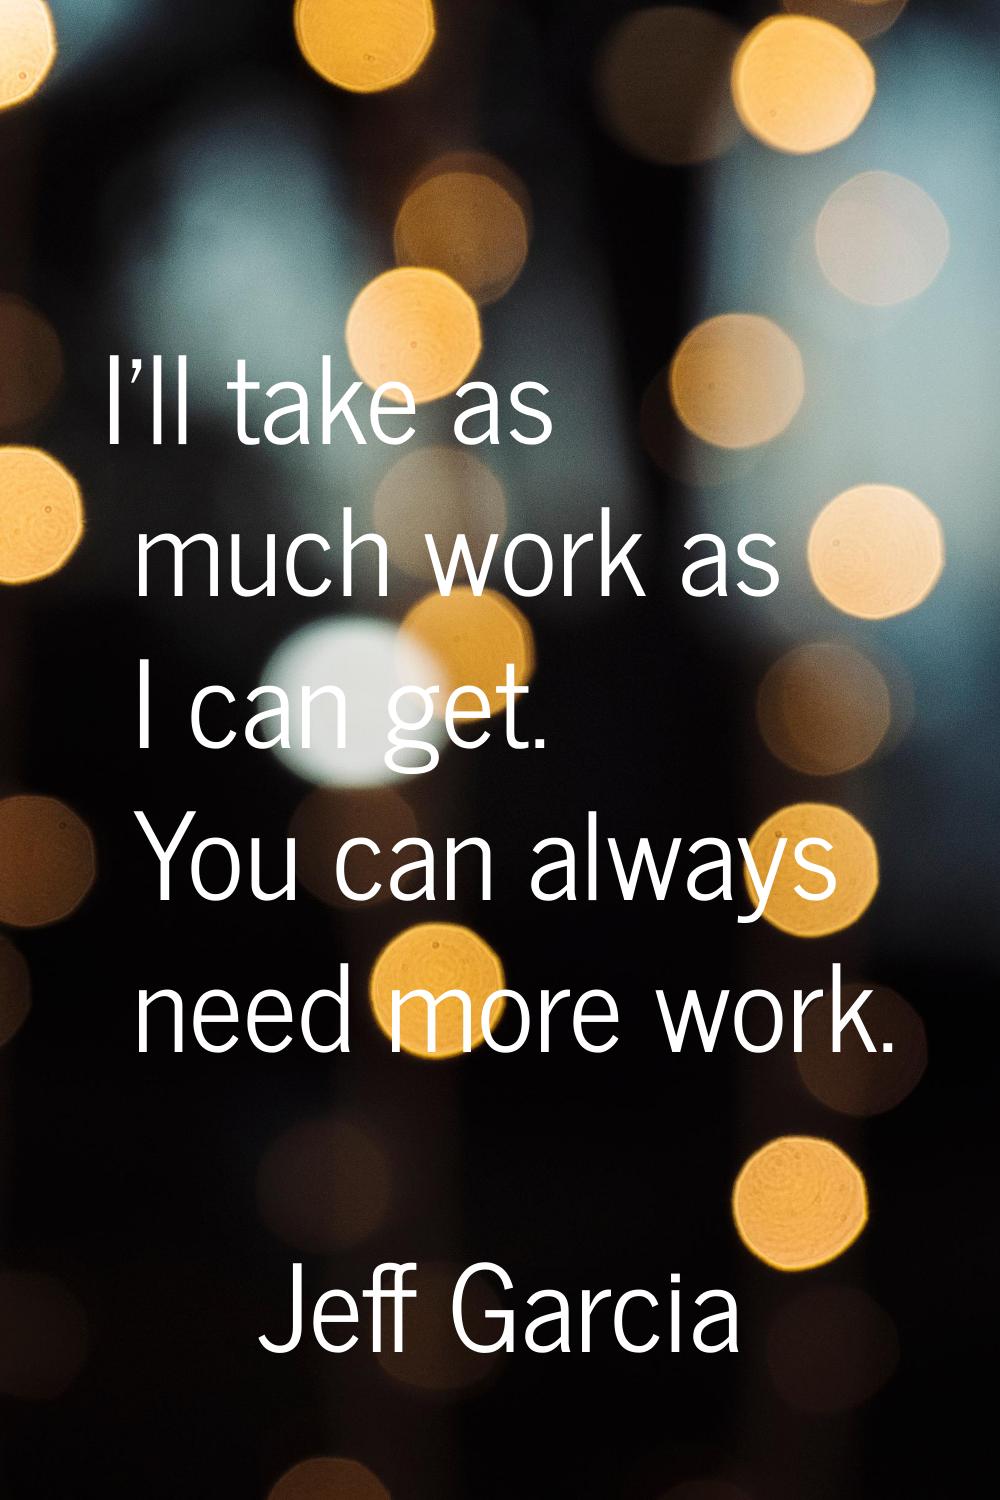 I'll take as much work as I can get. You can always need more work.